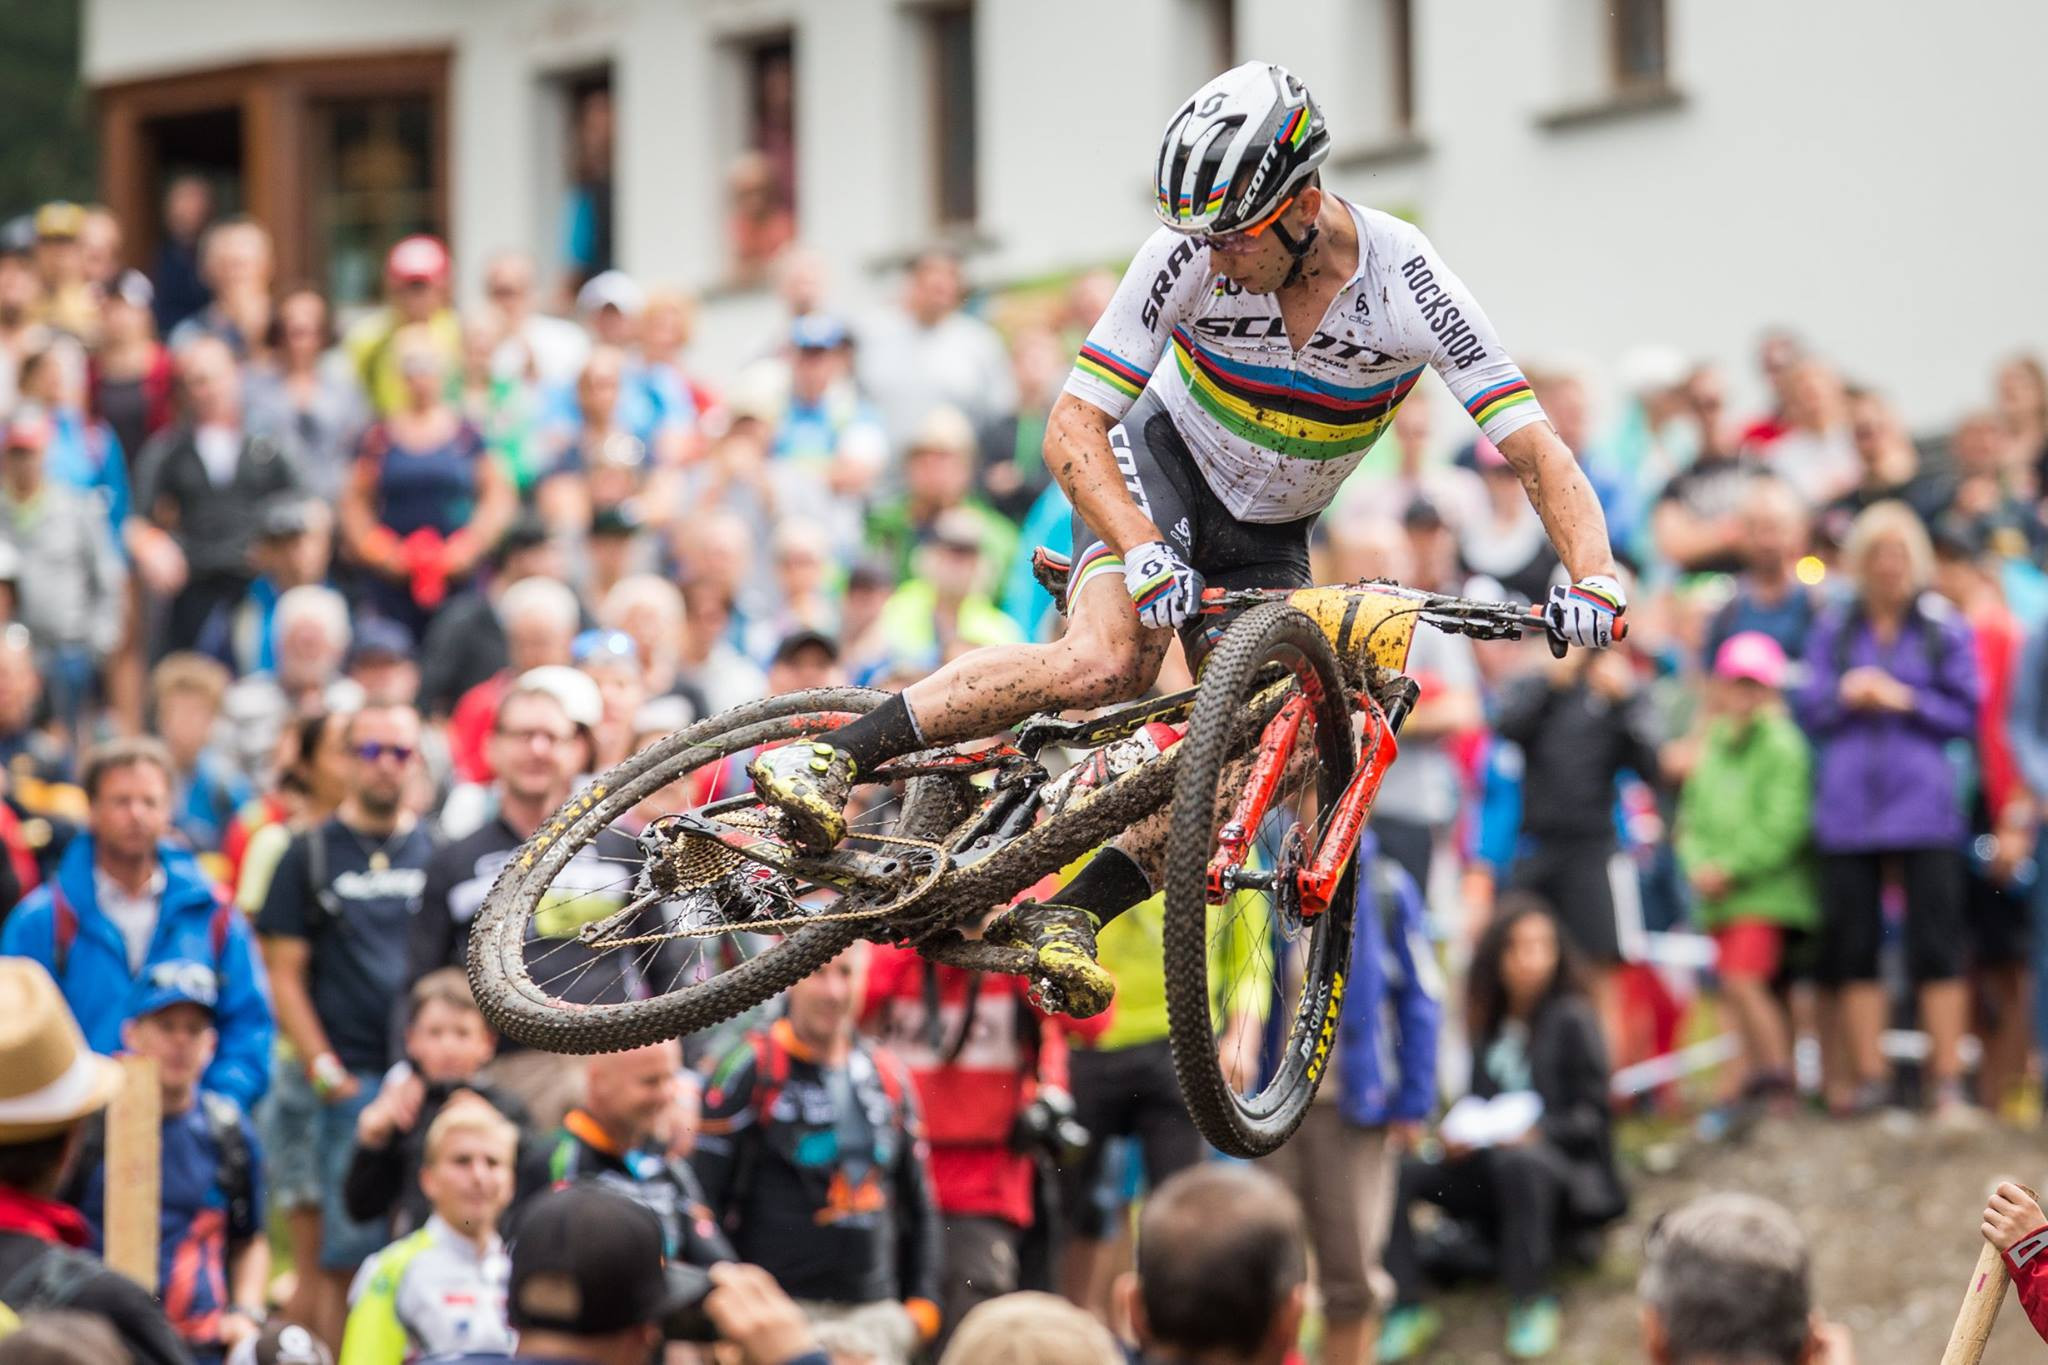 Home rider Nino Schurter is targeting a seventh title at the UCI Mountain Bike World Championships at Lenzerheide in Switzerland ©UCI